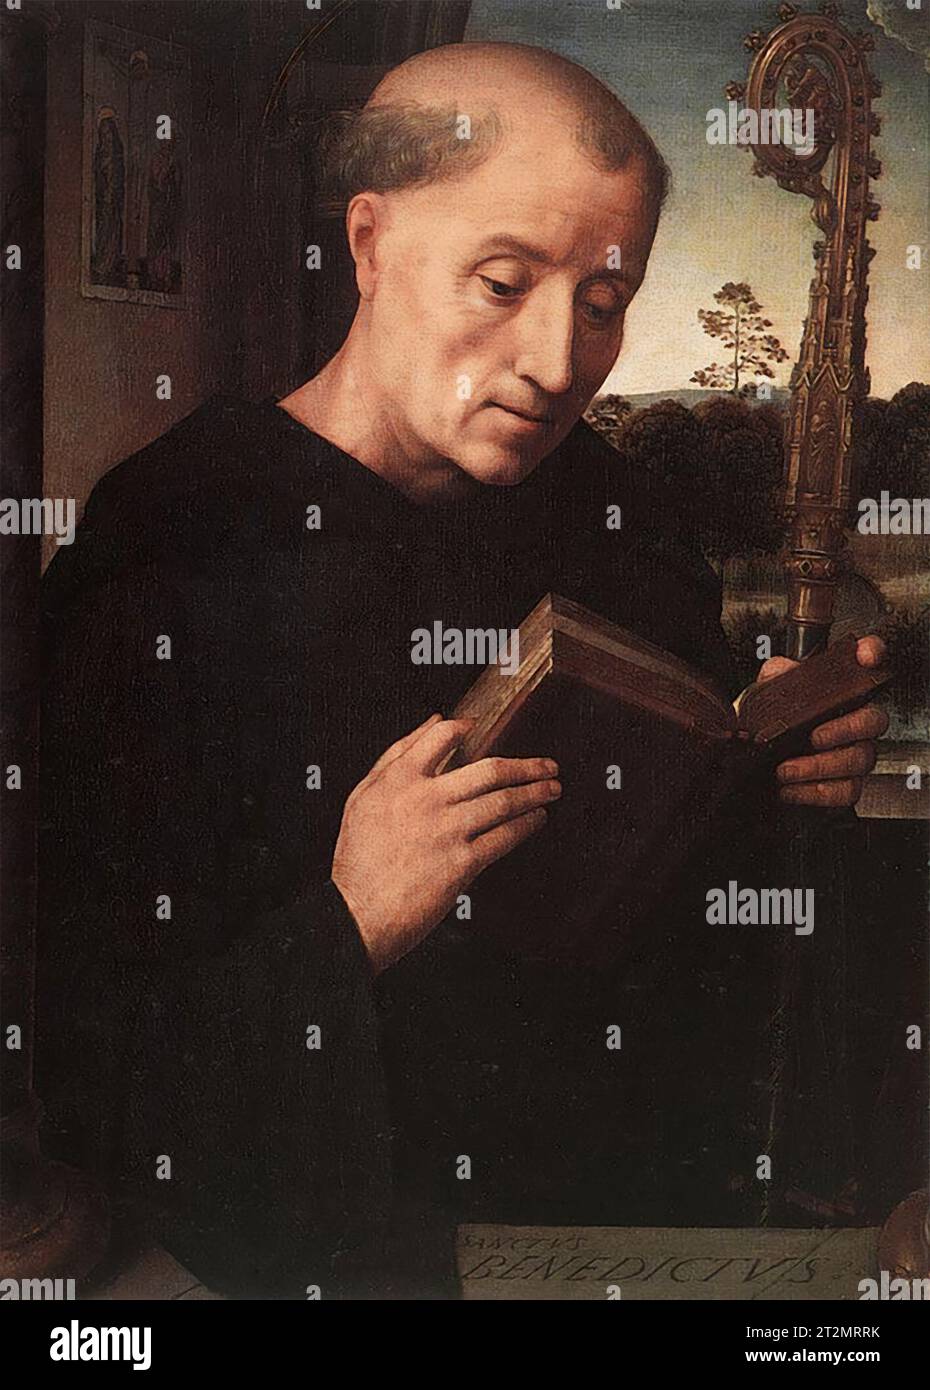 Benedict of Nursia. Portrait of Saint Benedict as depicted in the Benedetto Portinari Triptych, by Hans Memling, oil on panel, 1487 Stock Photo